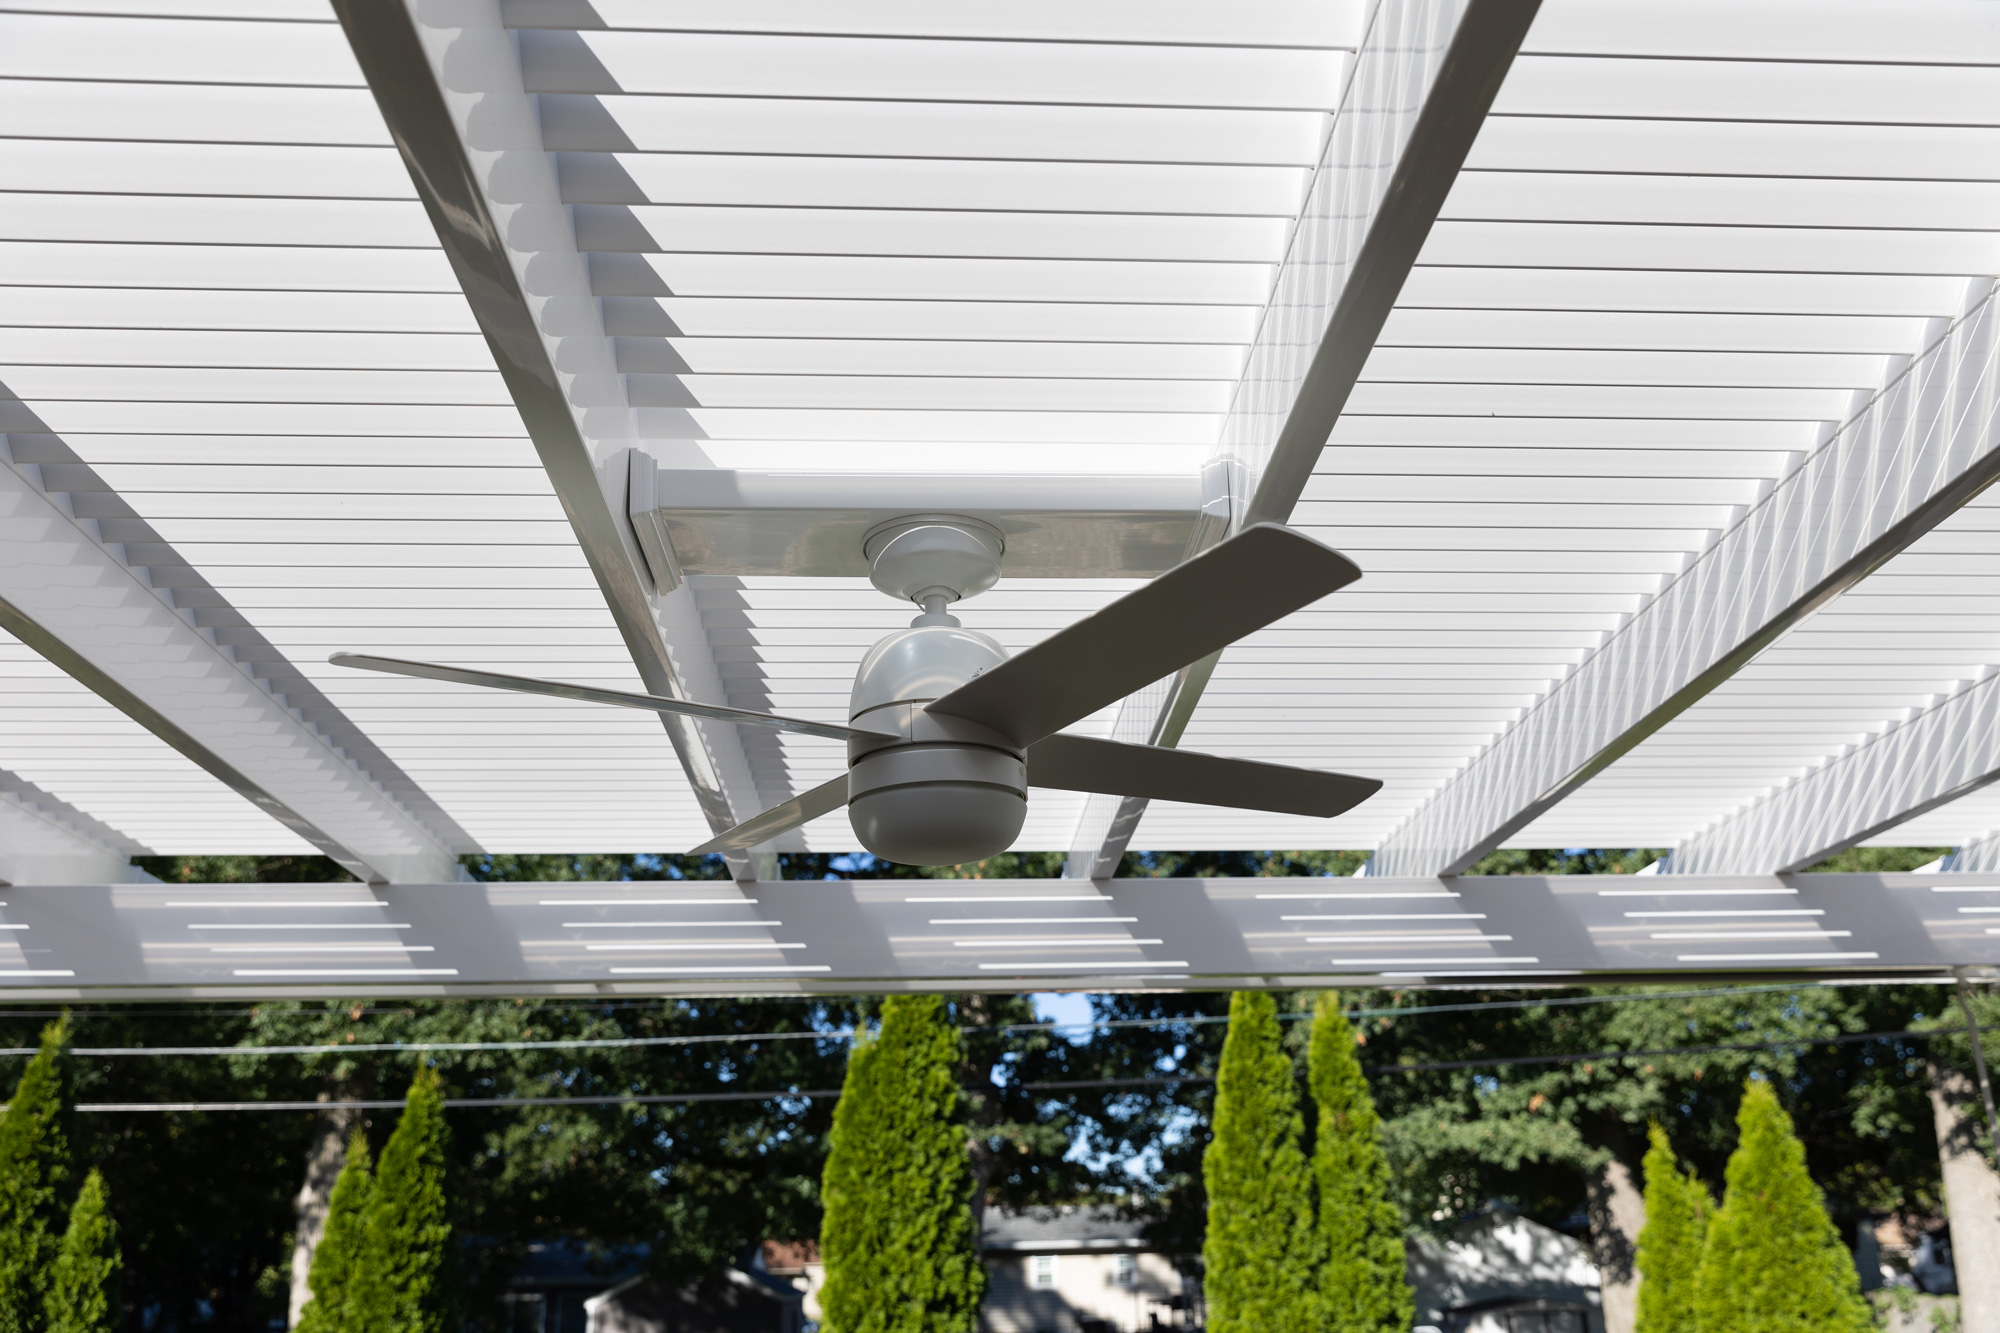 Close up photo of an outdoor fan installed on a heartland pergola